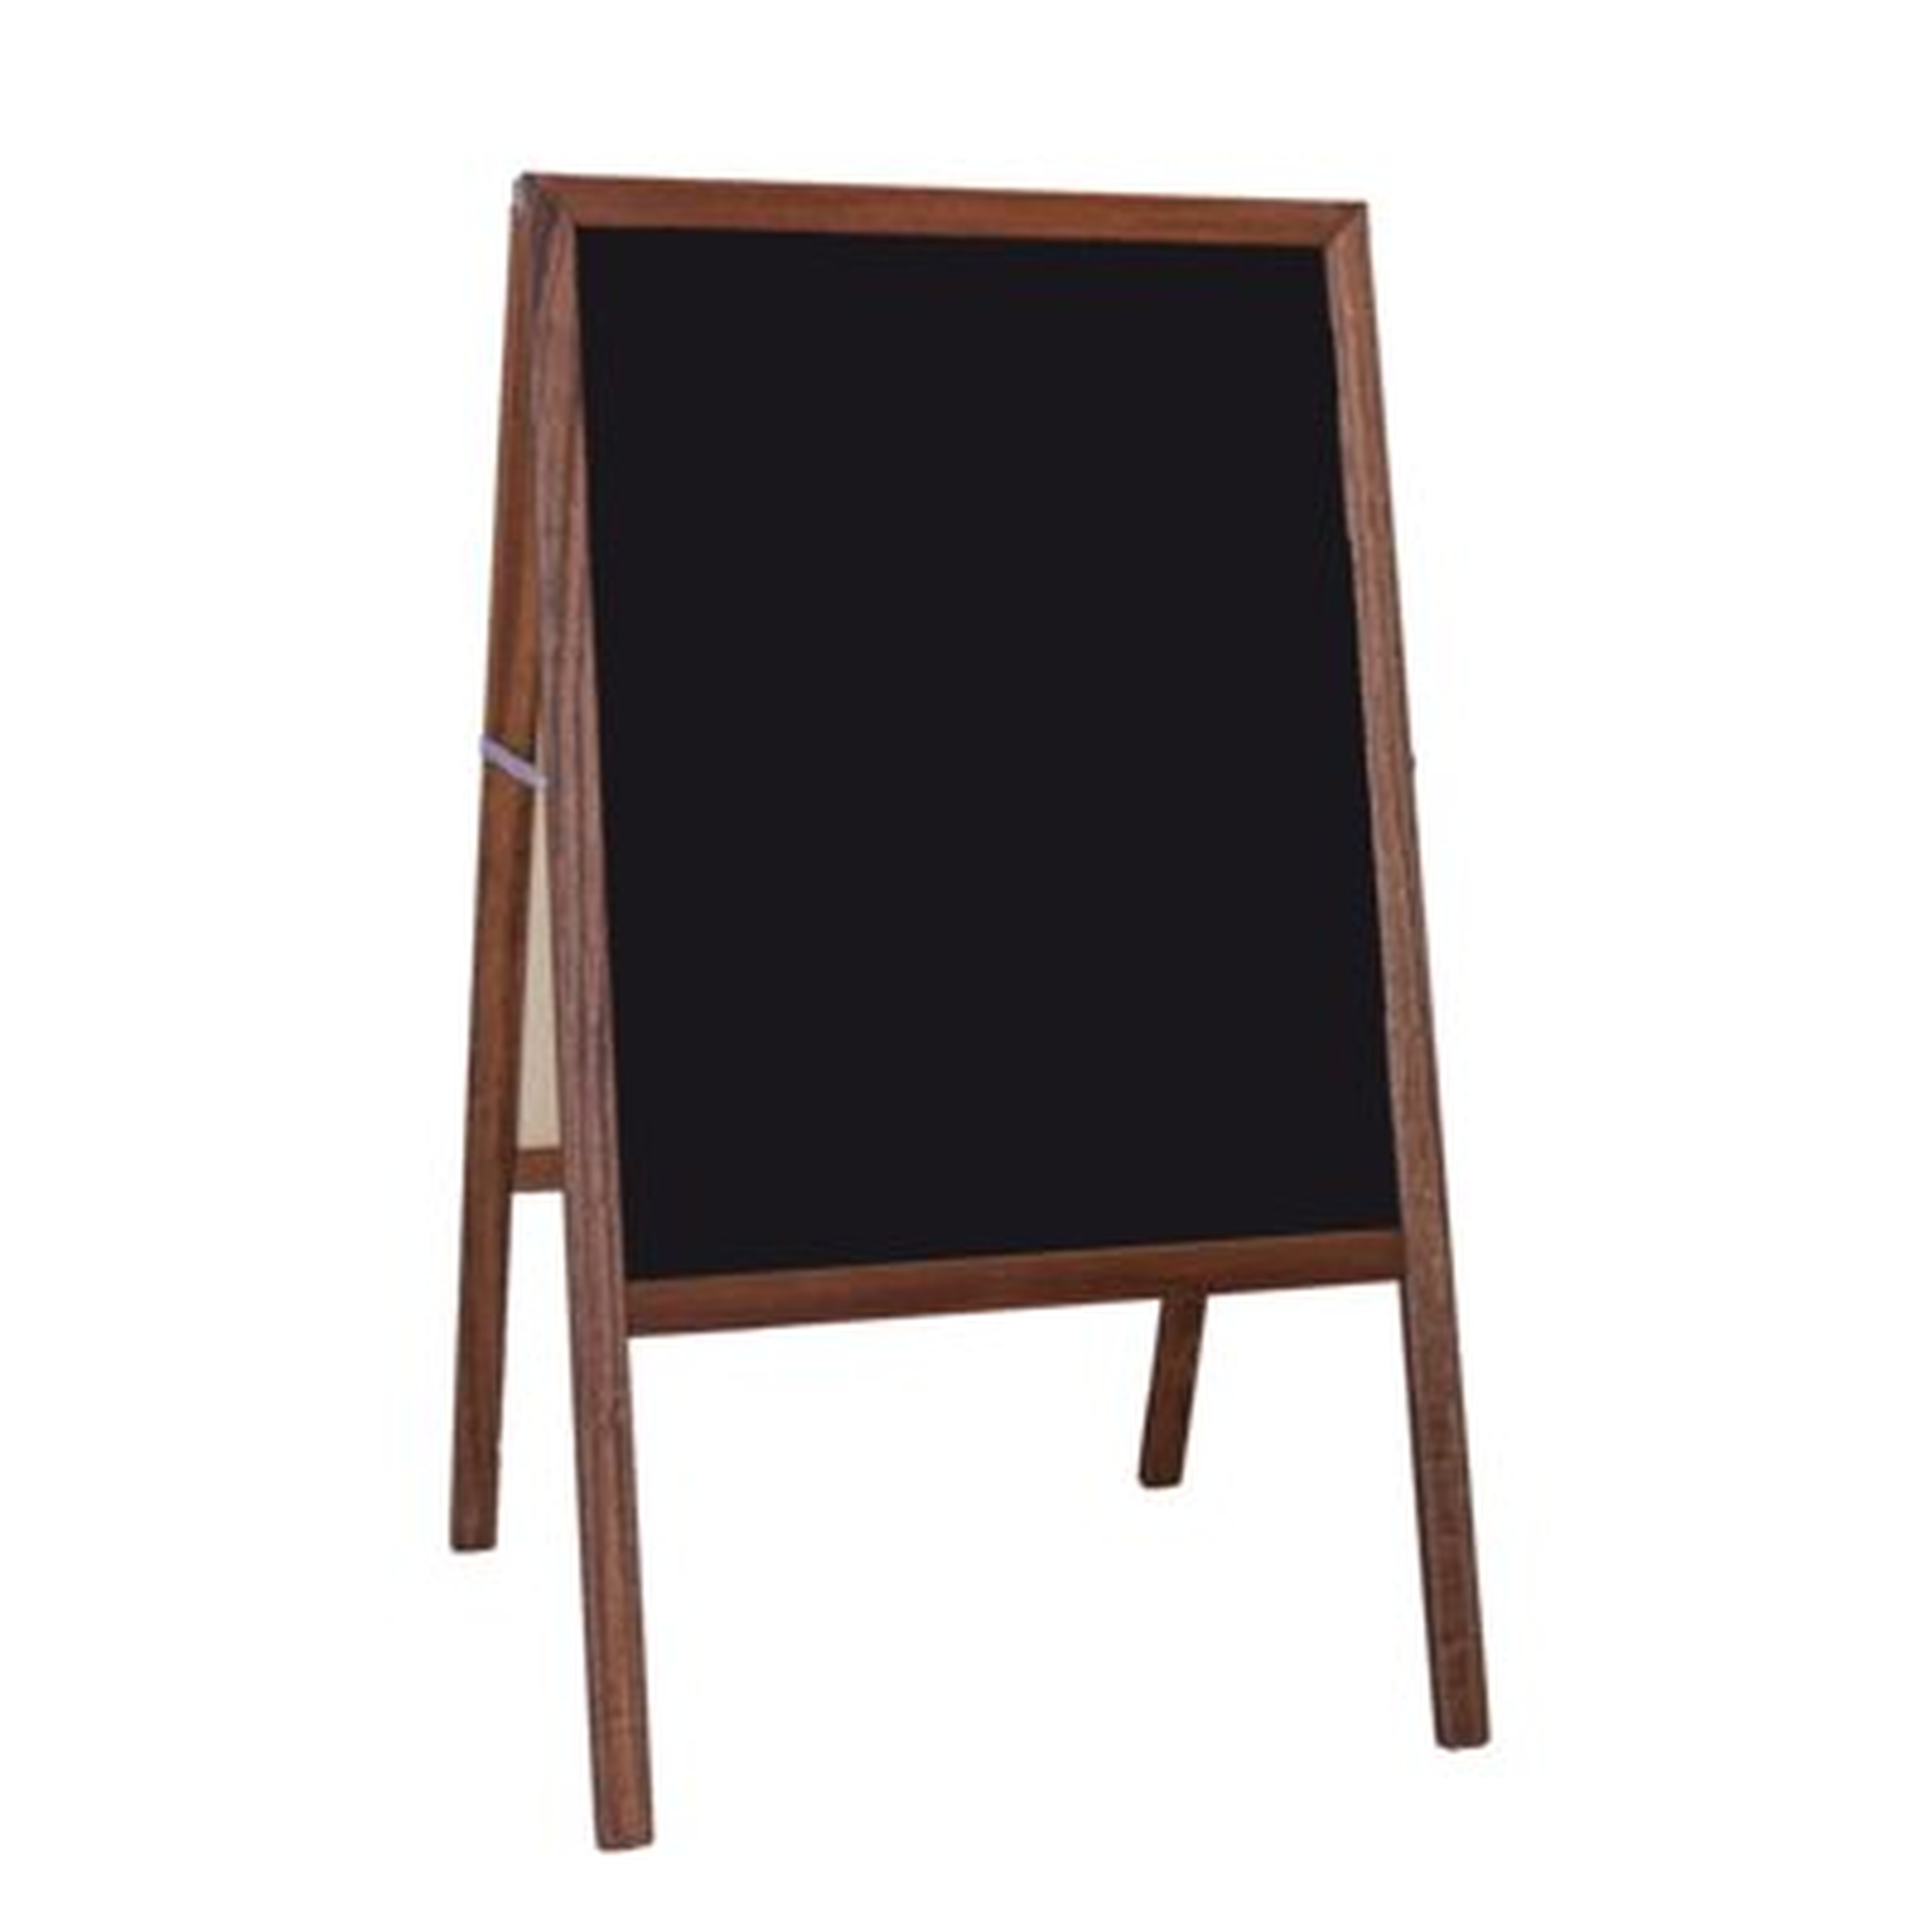 Stained Hardwood Marquee Double Sided Board Easel - Wayfair